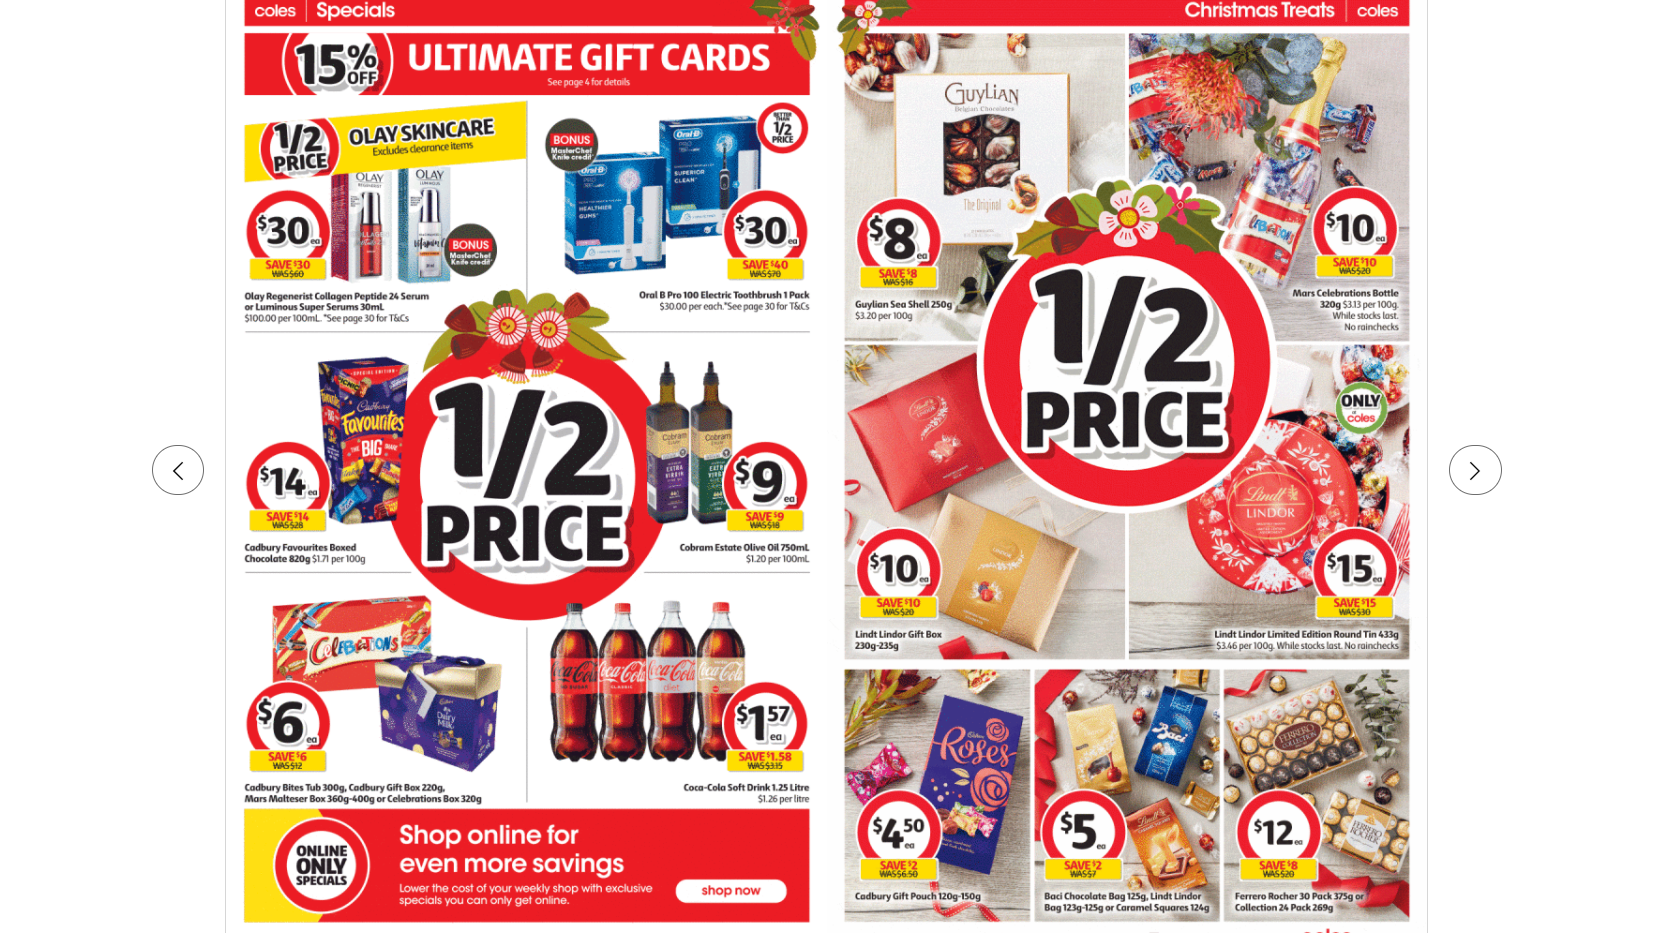 Coles this week's catalogue up to 50% OFF on groceries, beauty & everyday essentials(until 7th Dec)